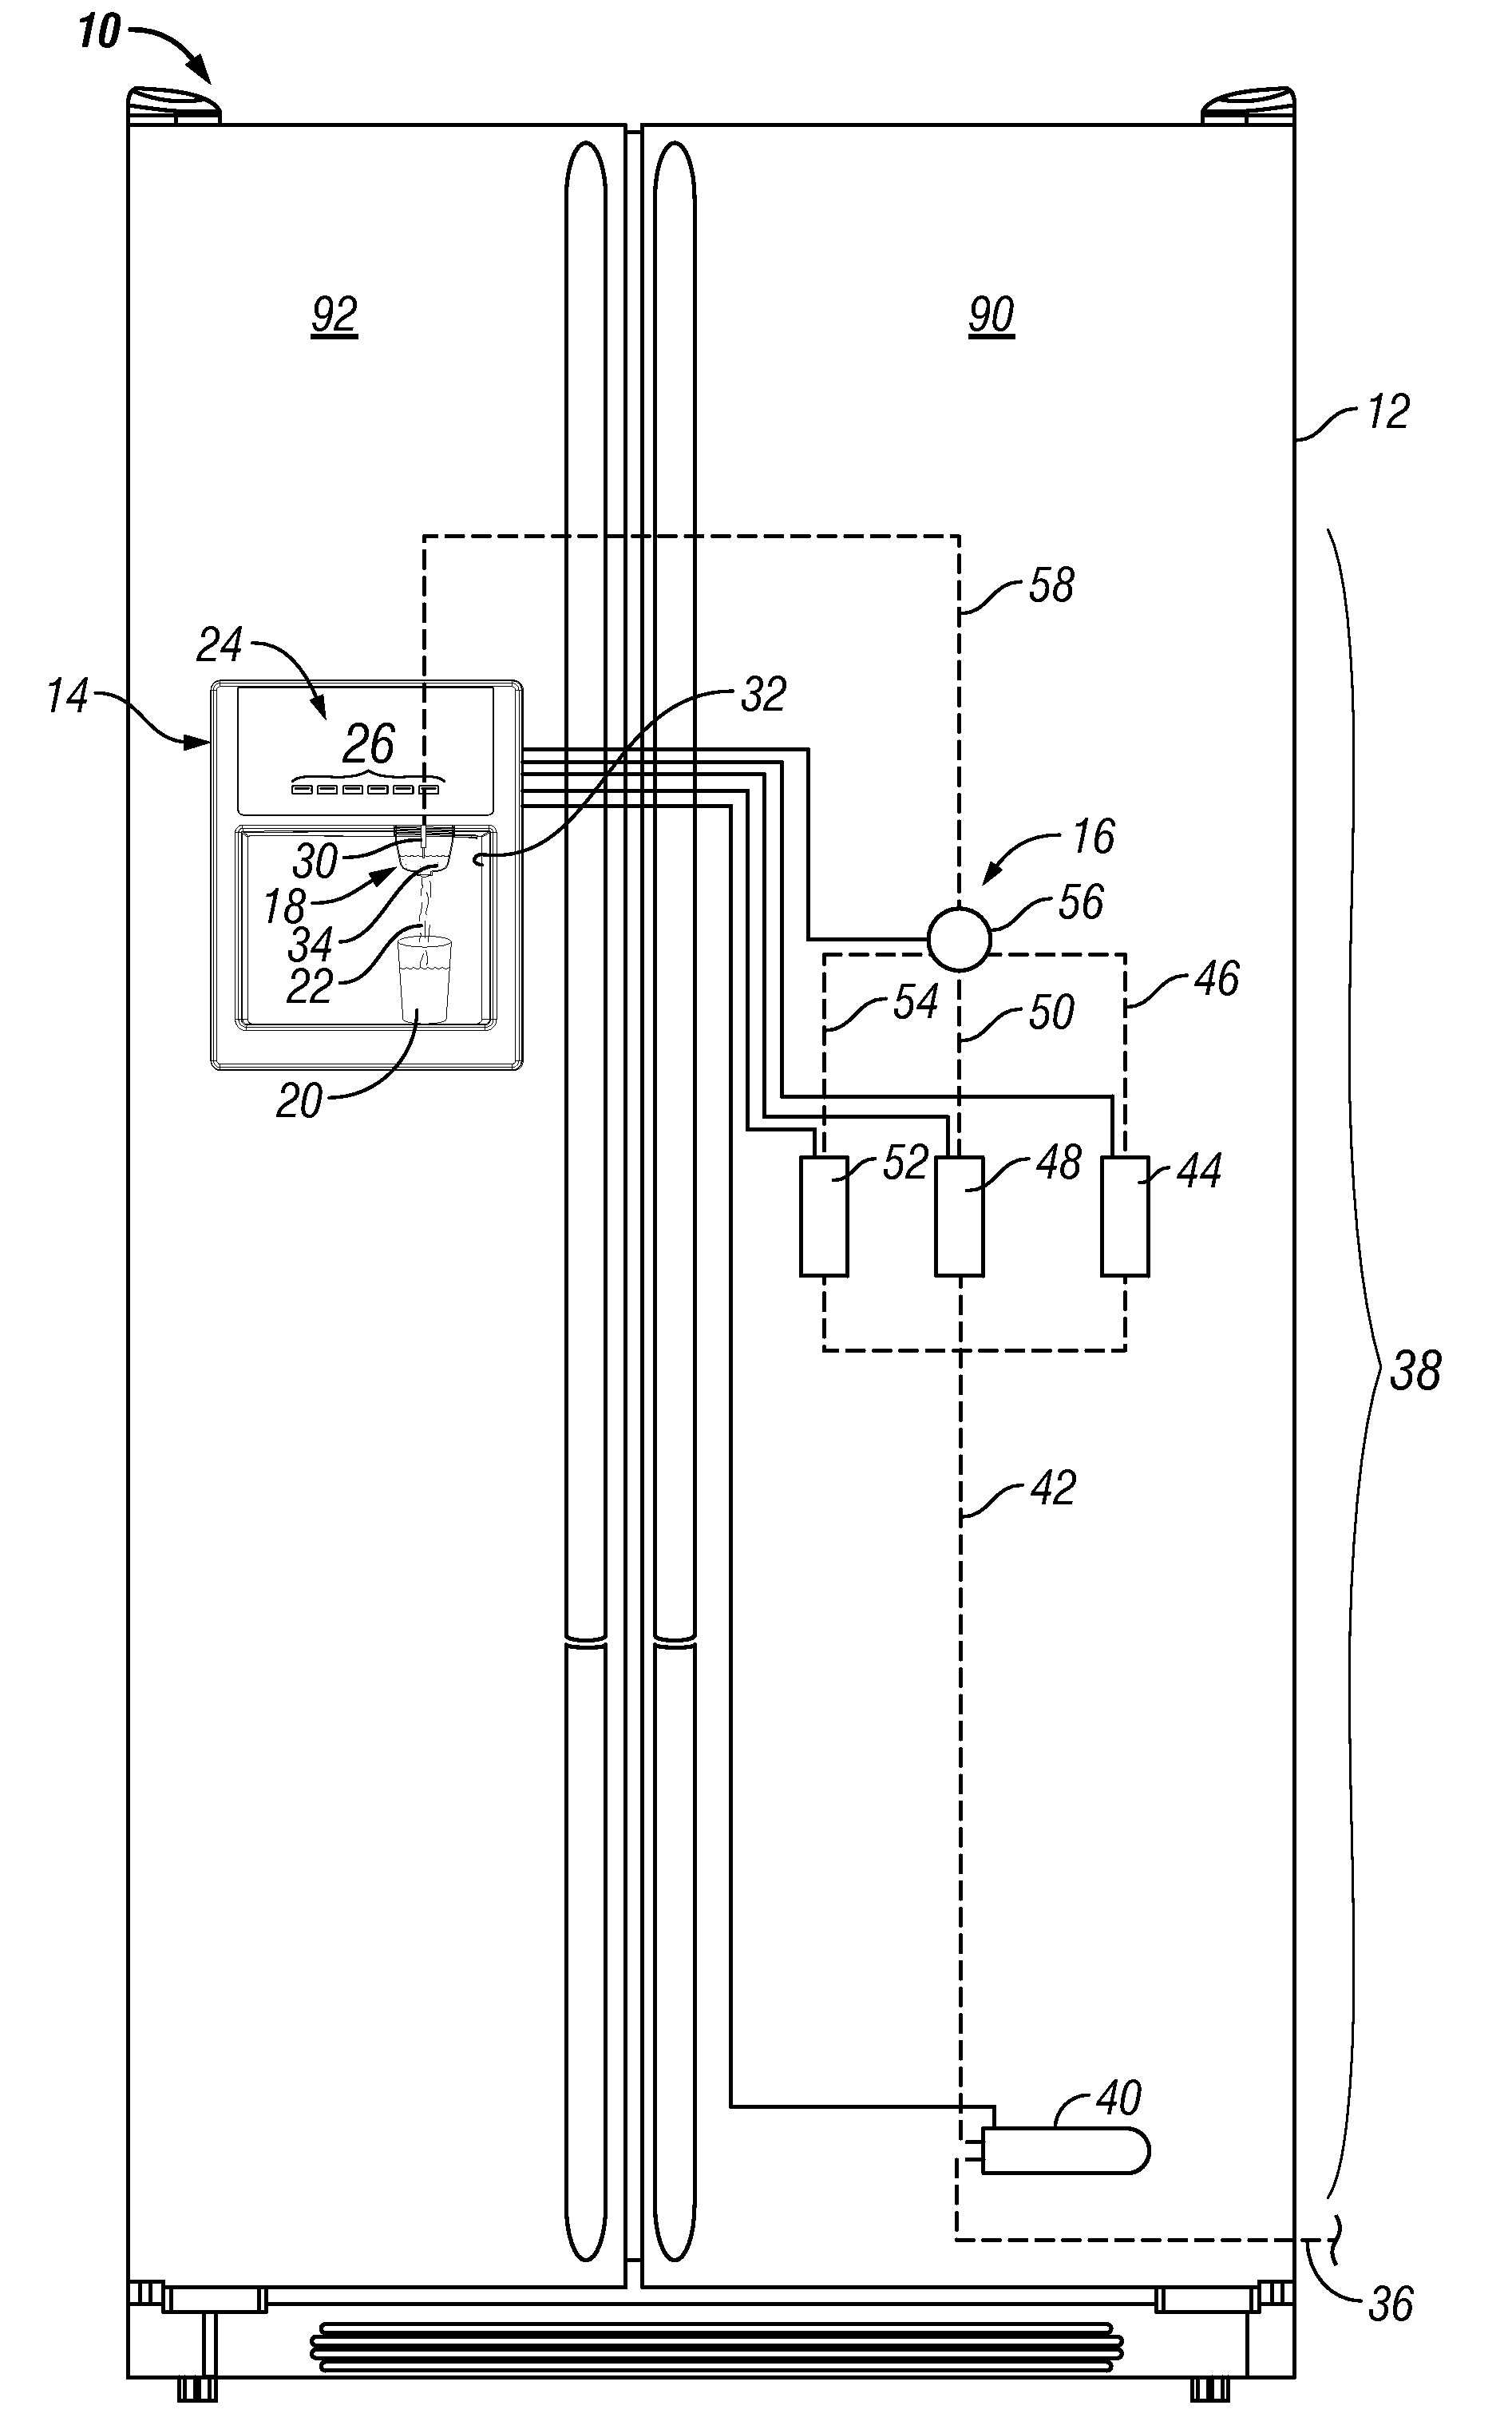 Apparatuses and methods for a refrigerator having liquid conditioning and enhancement components for enhanced beverage dispensing